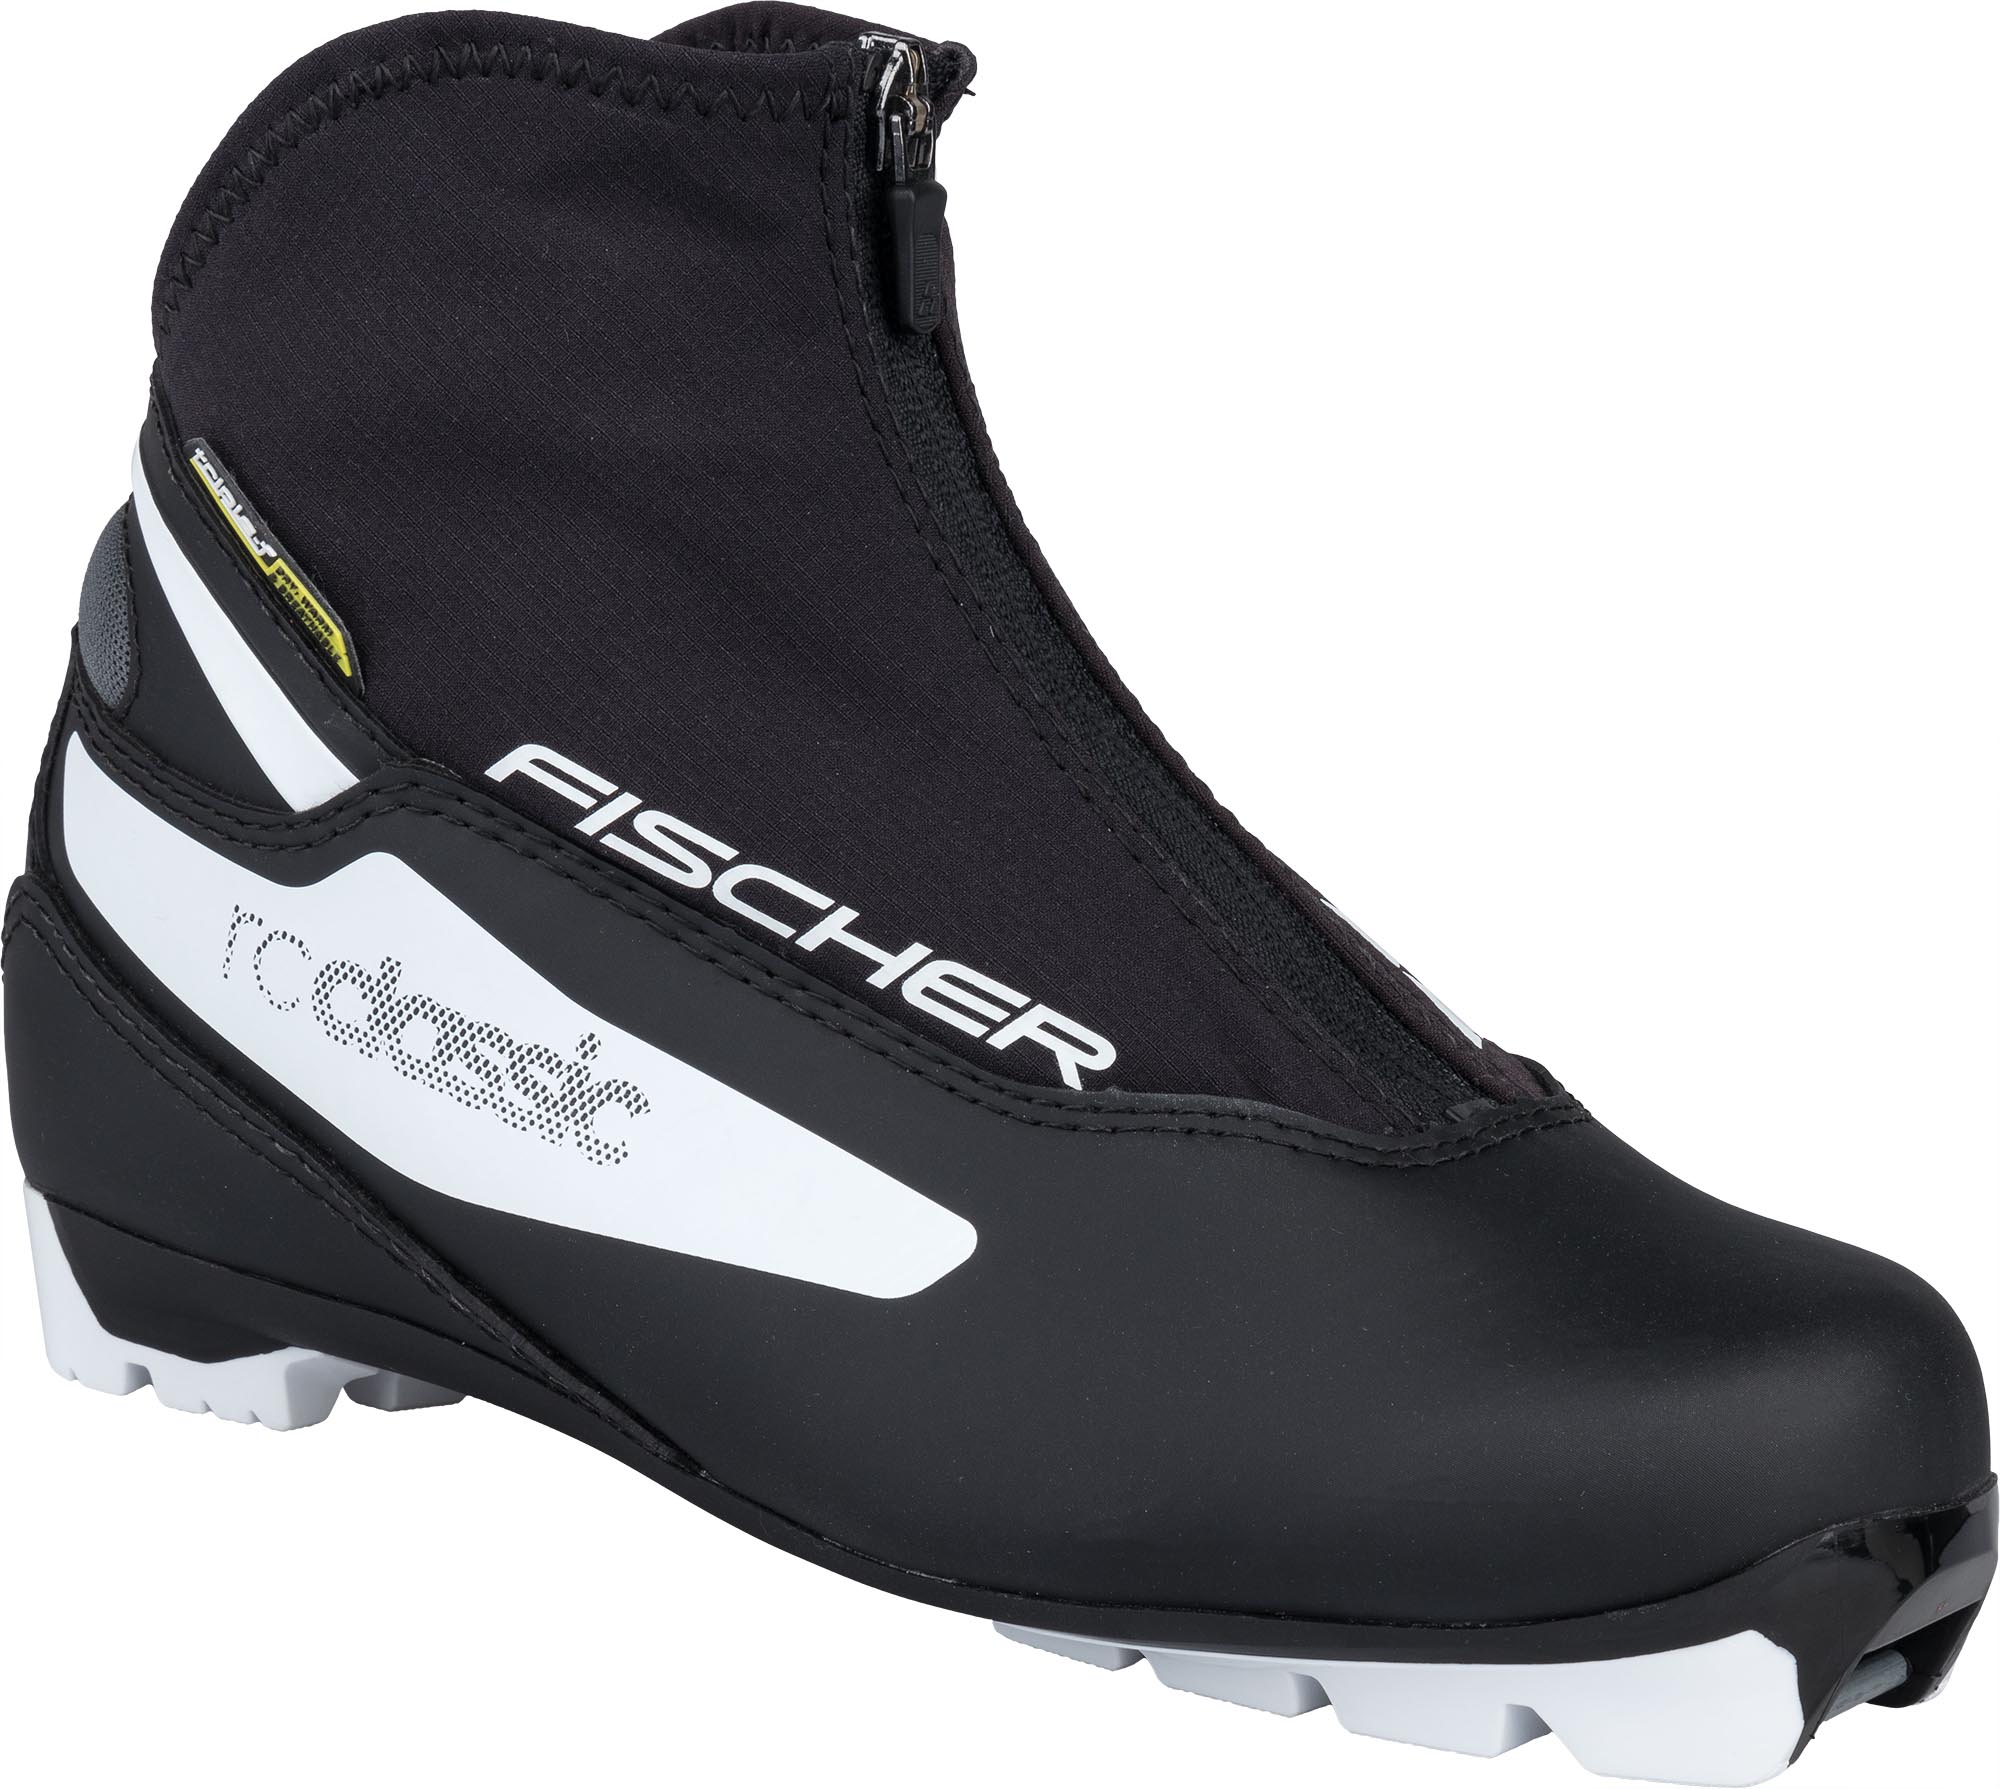 Women’s nordic ski boots for classic style